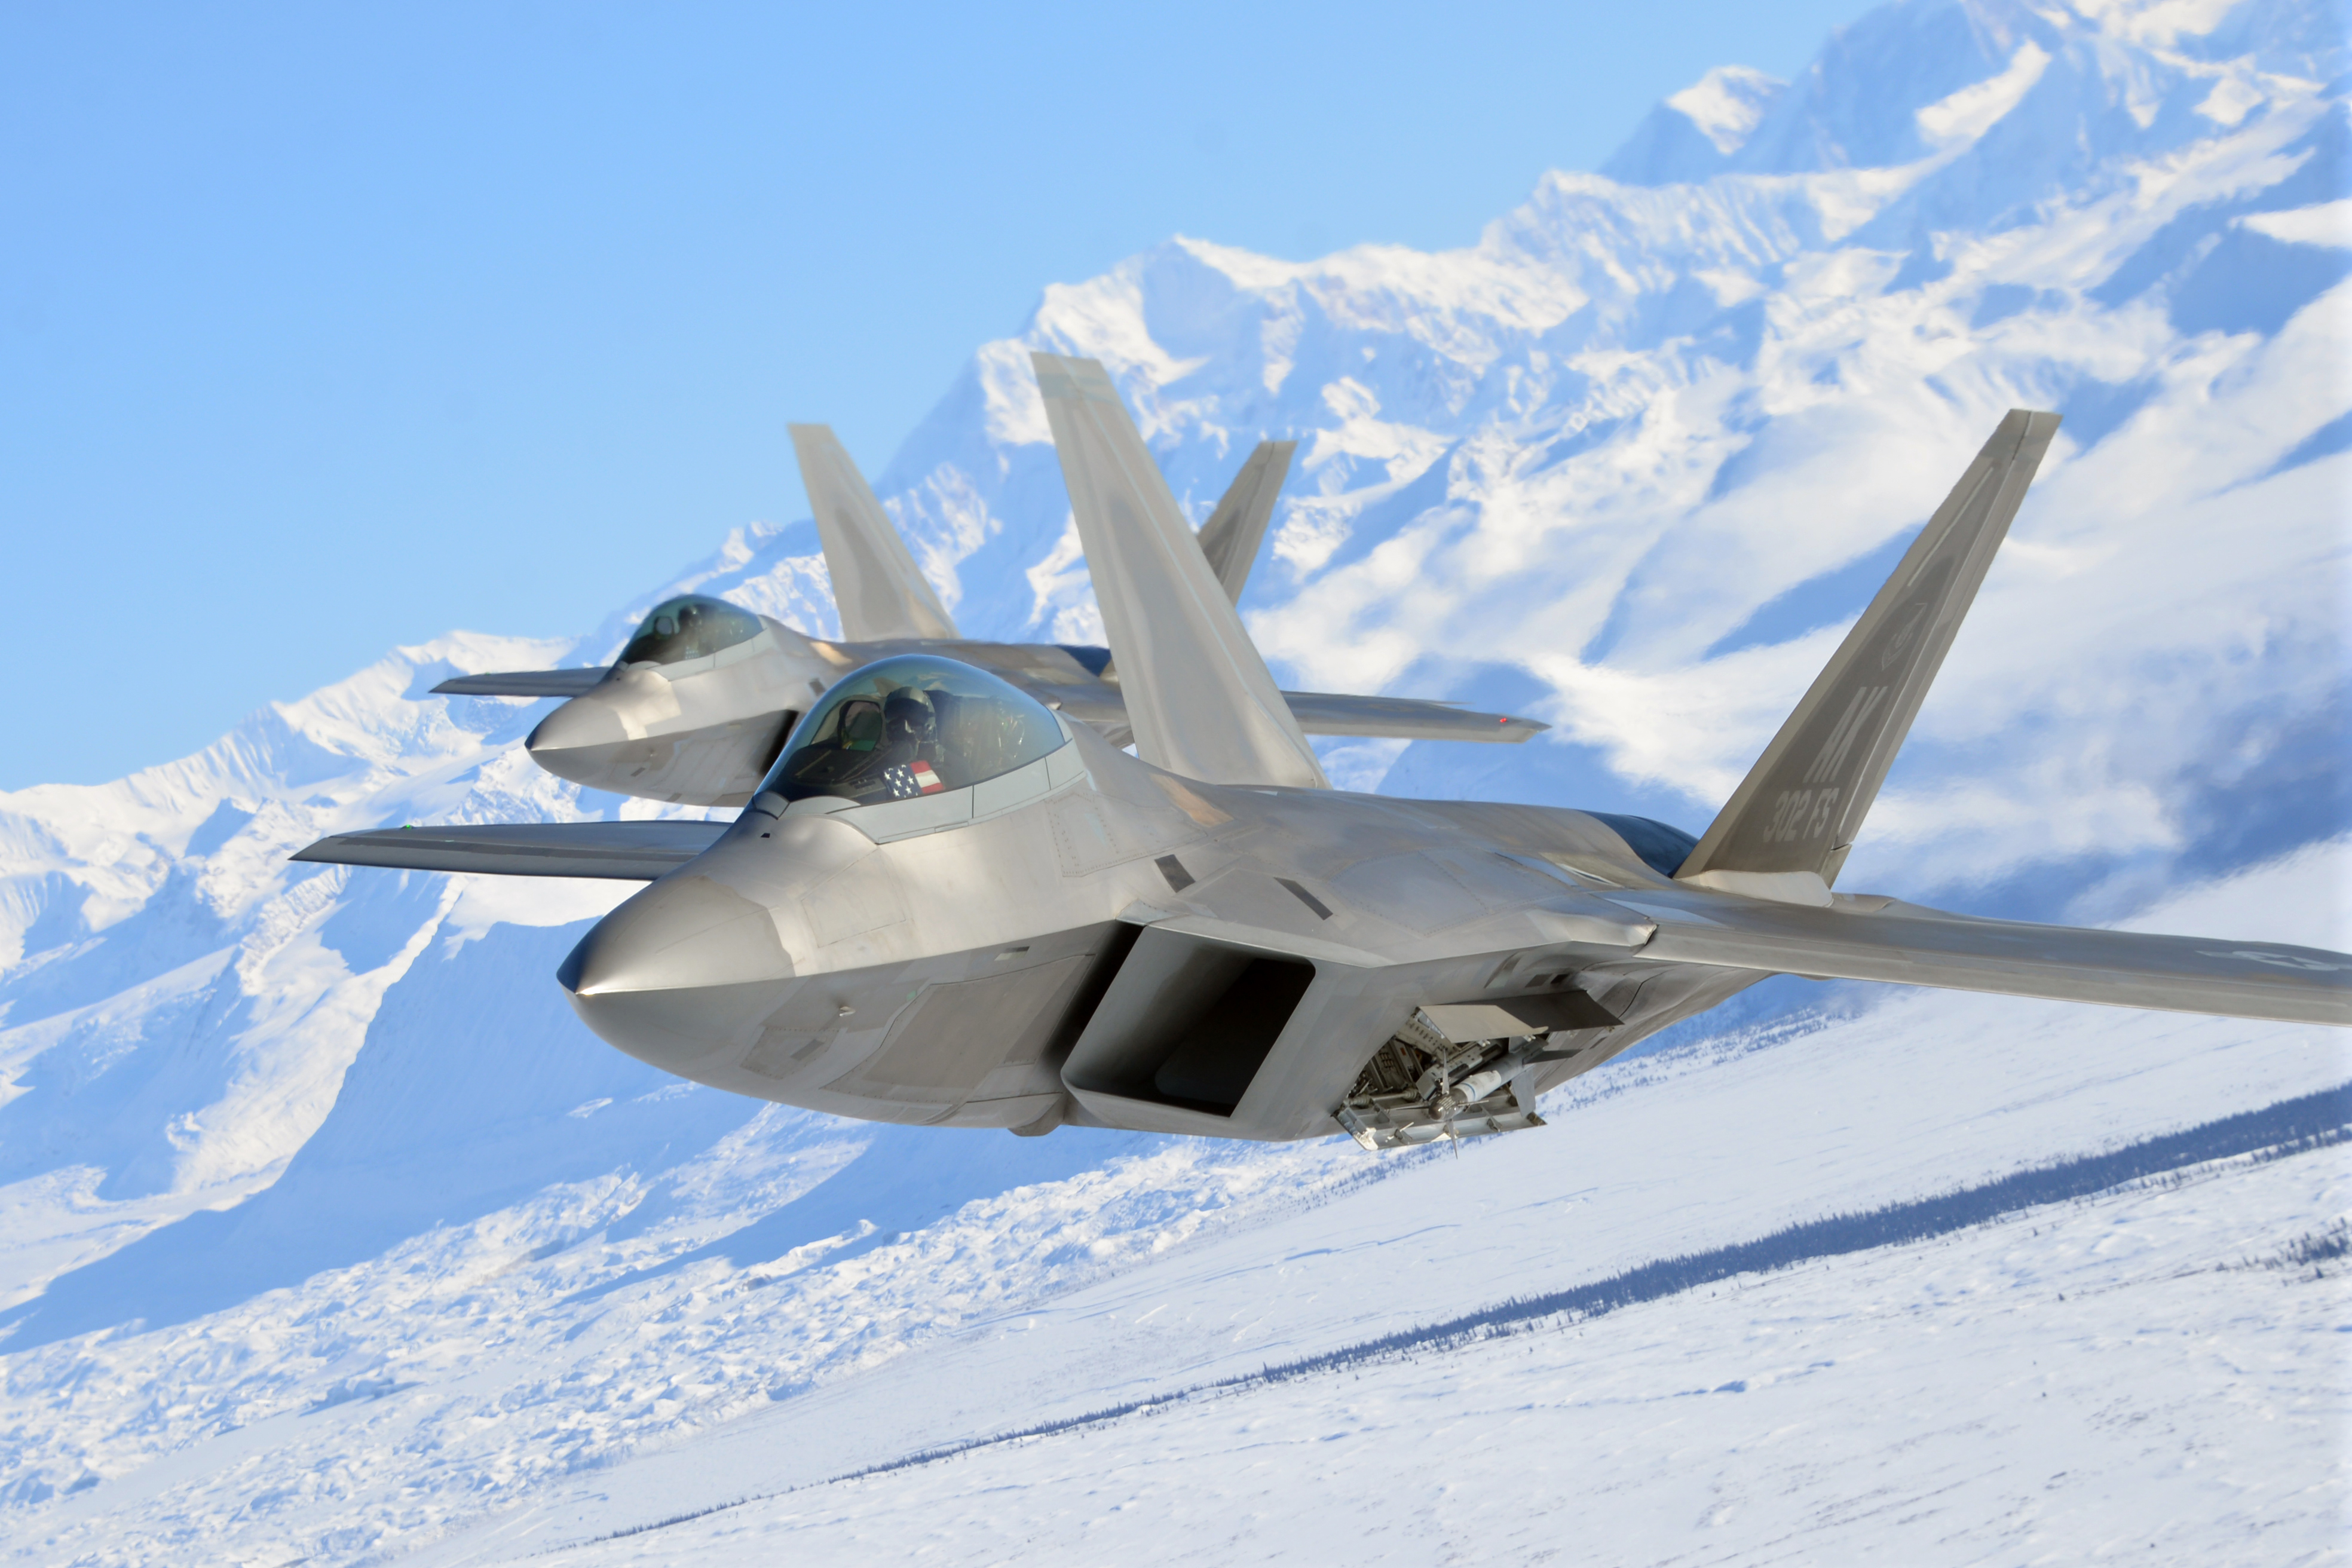 Photo of a USAF F-22 Raptor jet in the sky